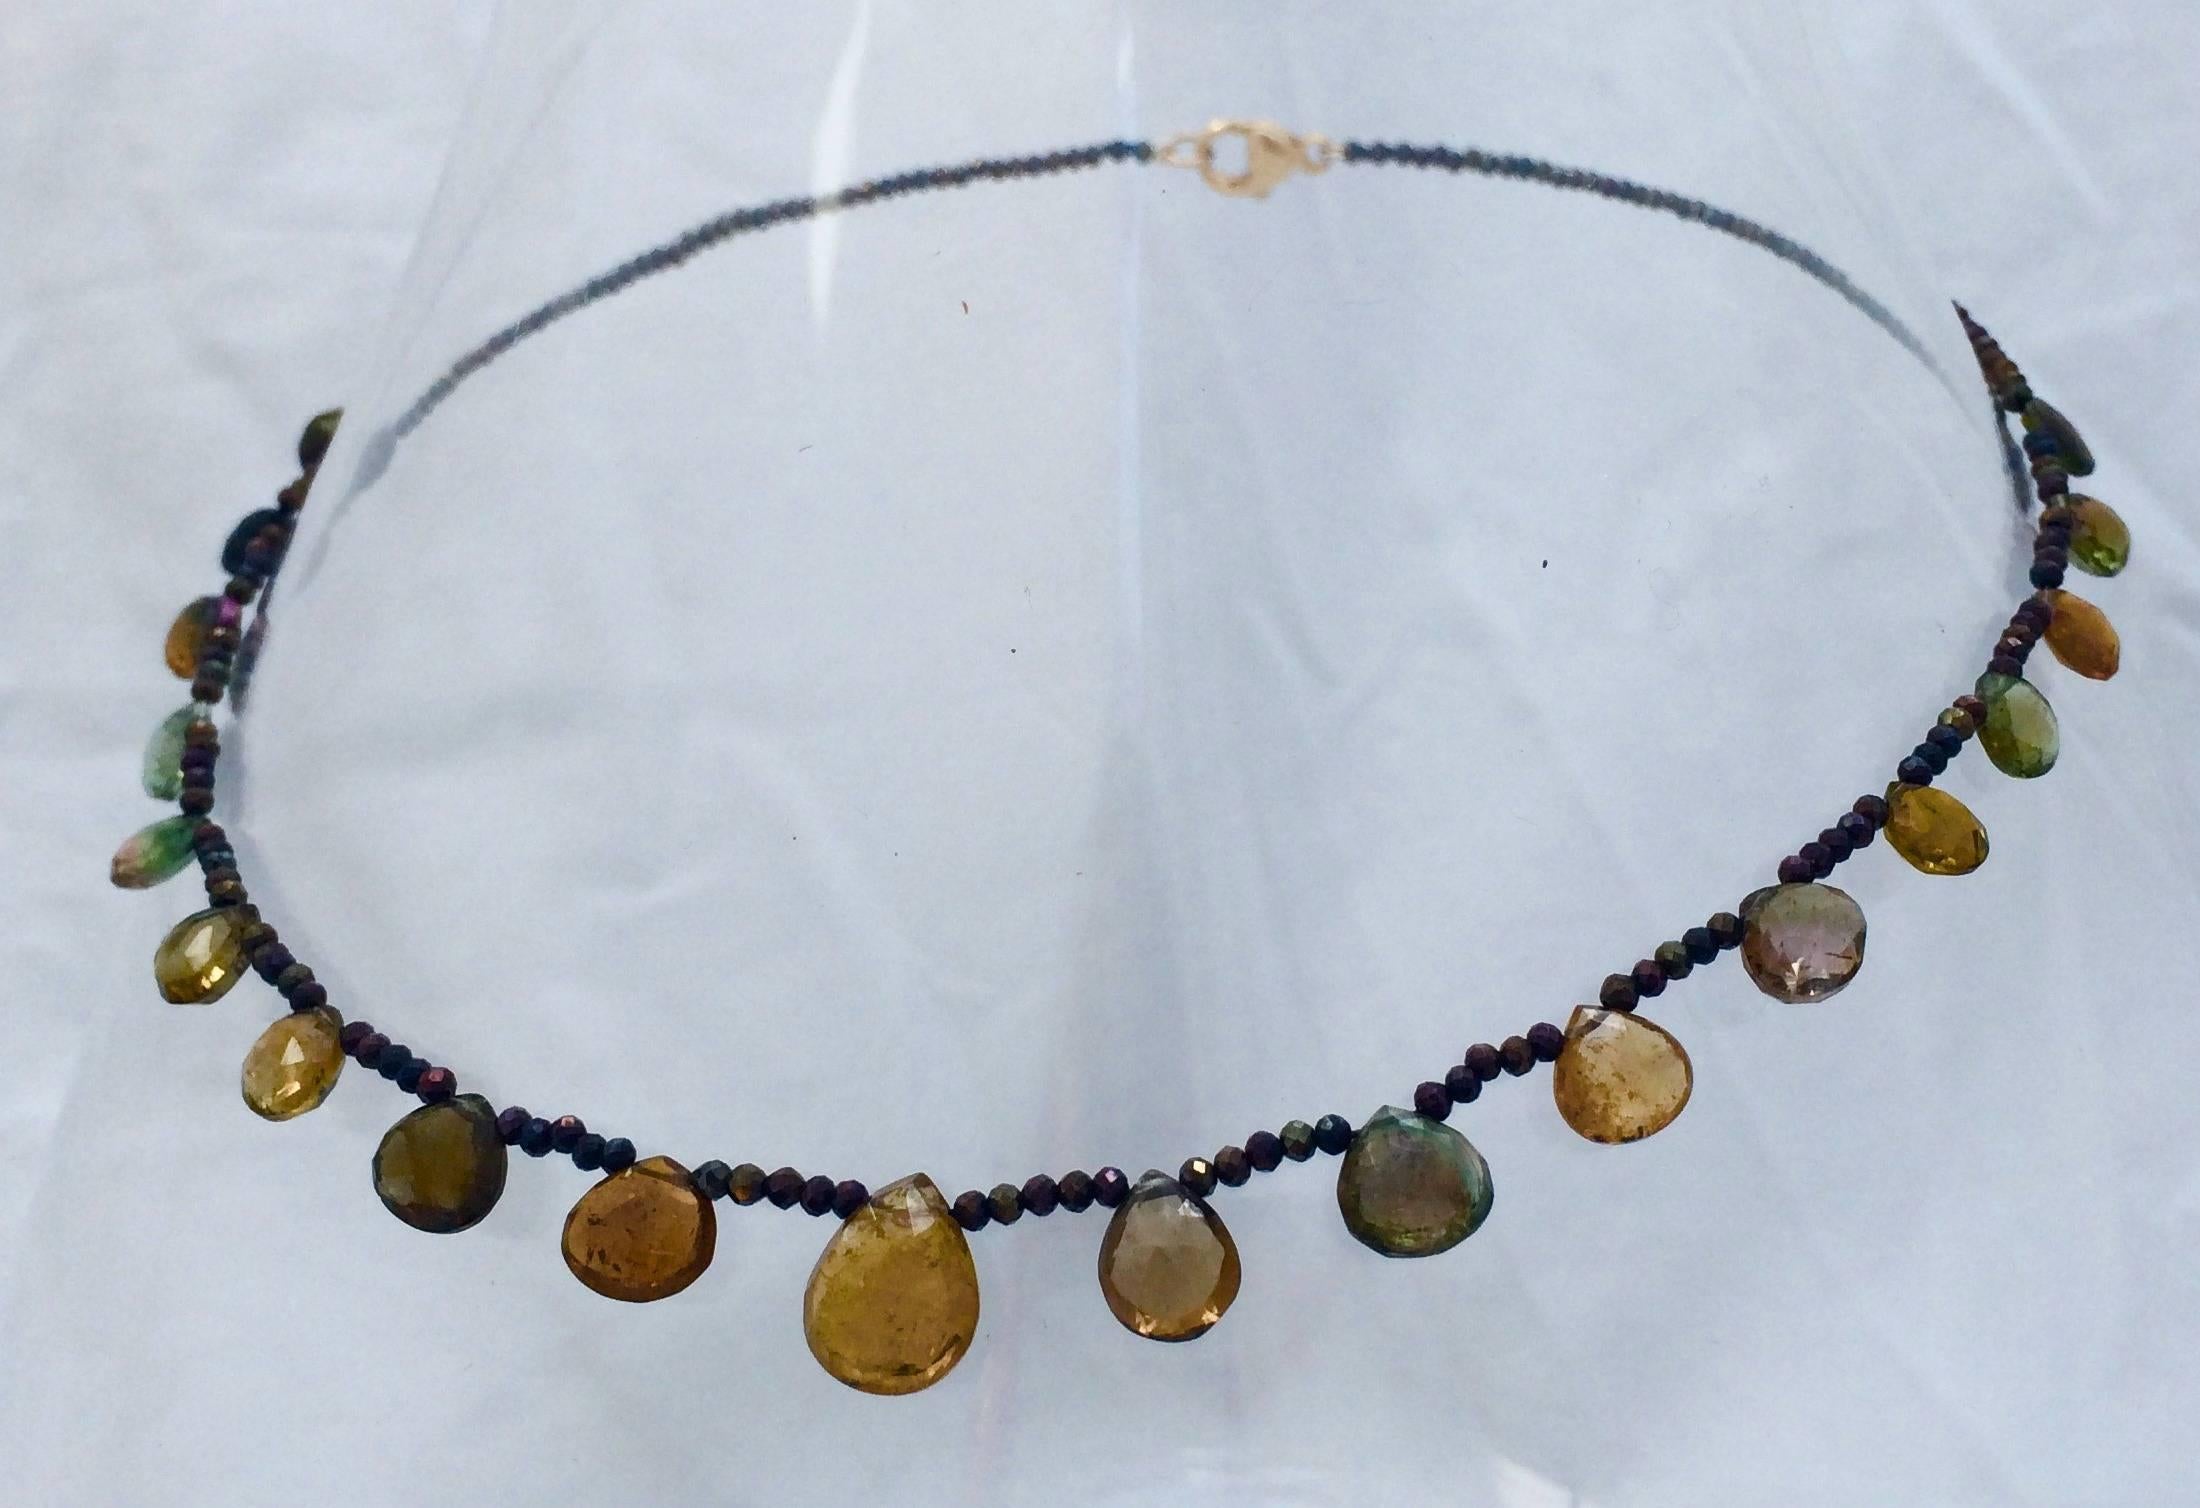 Elegant and understated.

Faceted Golden-hued Spinel beads are gently graduated into a tight strand. The strand is decorated with faceted/ multi-colored/ teardrop Tourmaline briolettes. The middle briolette is slightly larger than the surrounding